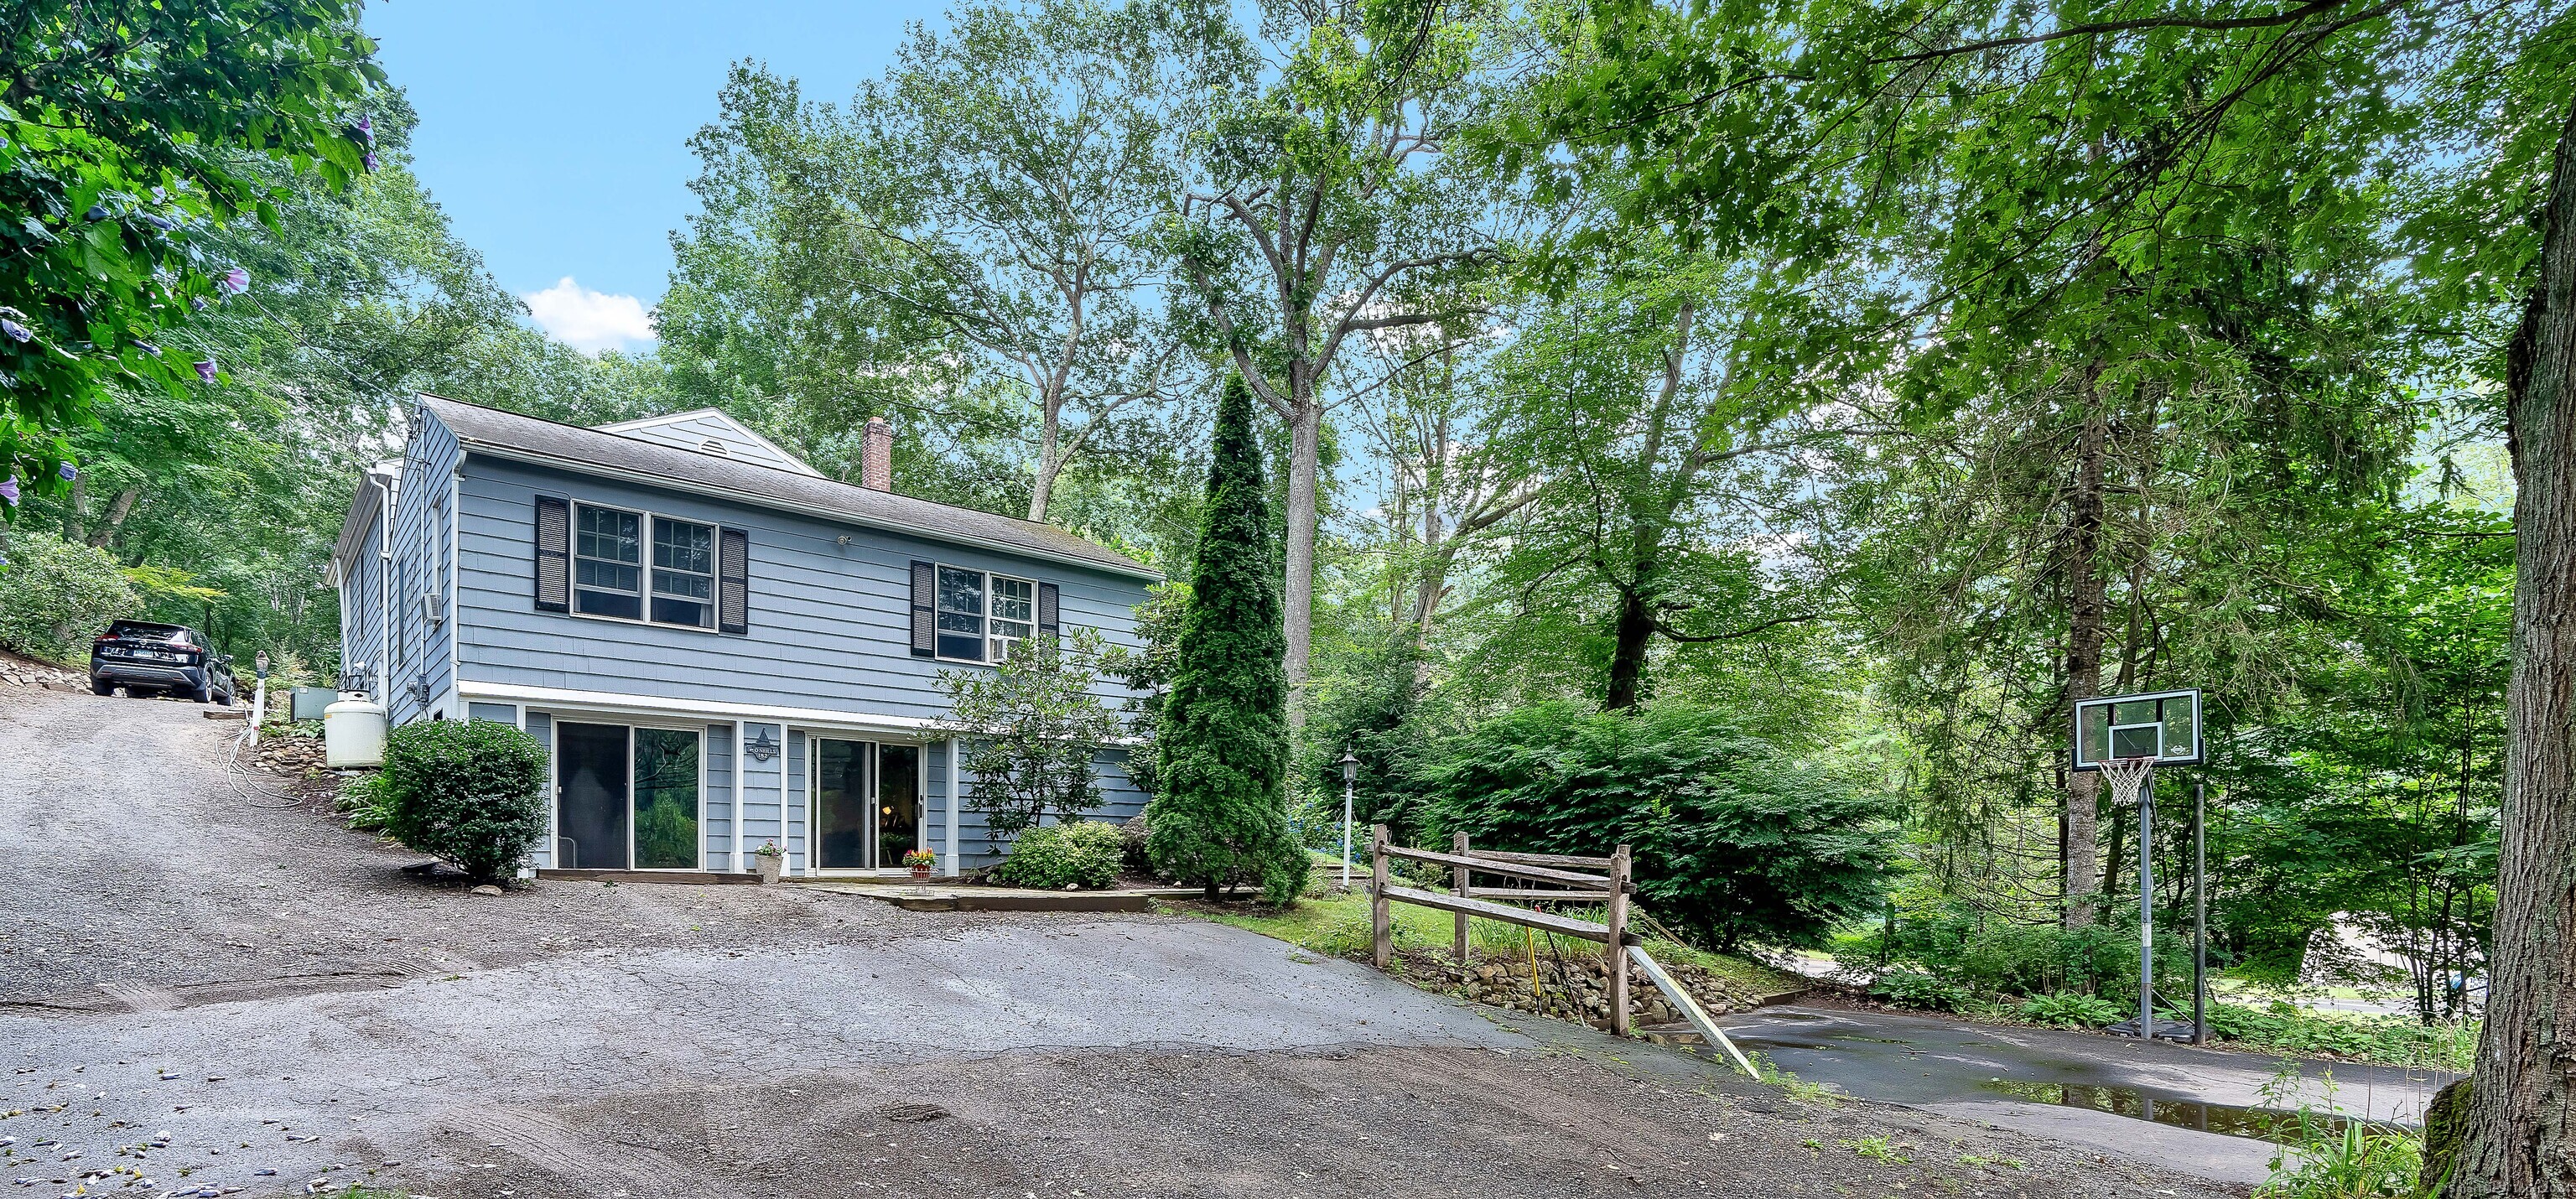 Rental Property at 182 Durham Road, Madison, Connecticut - Bedrooms: 4 
Bathrooms: 2 
Rooms: 9  - $3,900 MO.